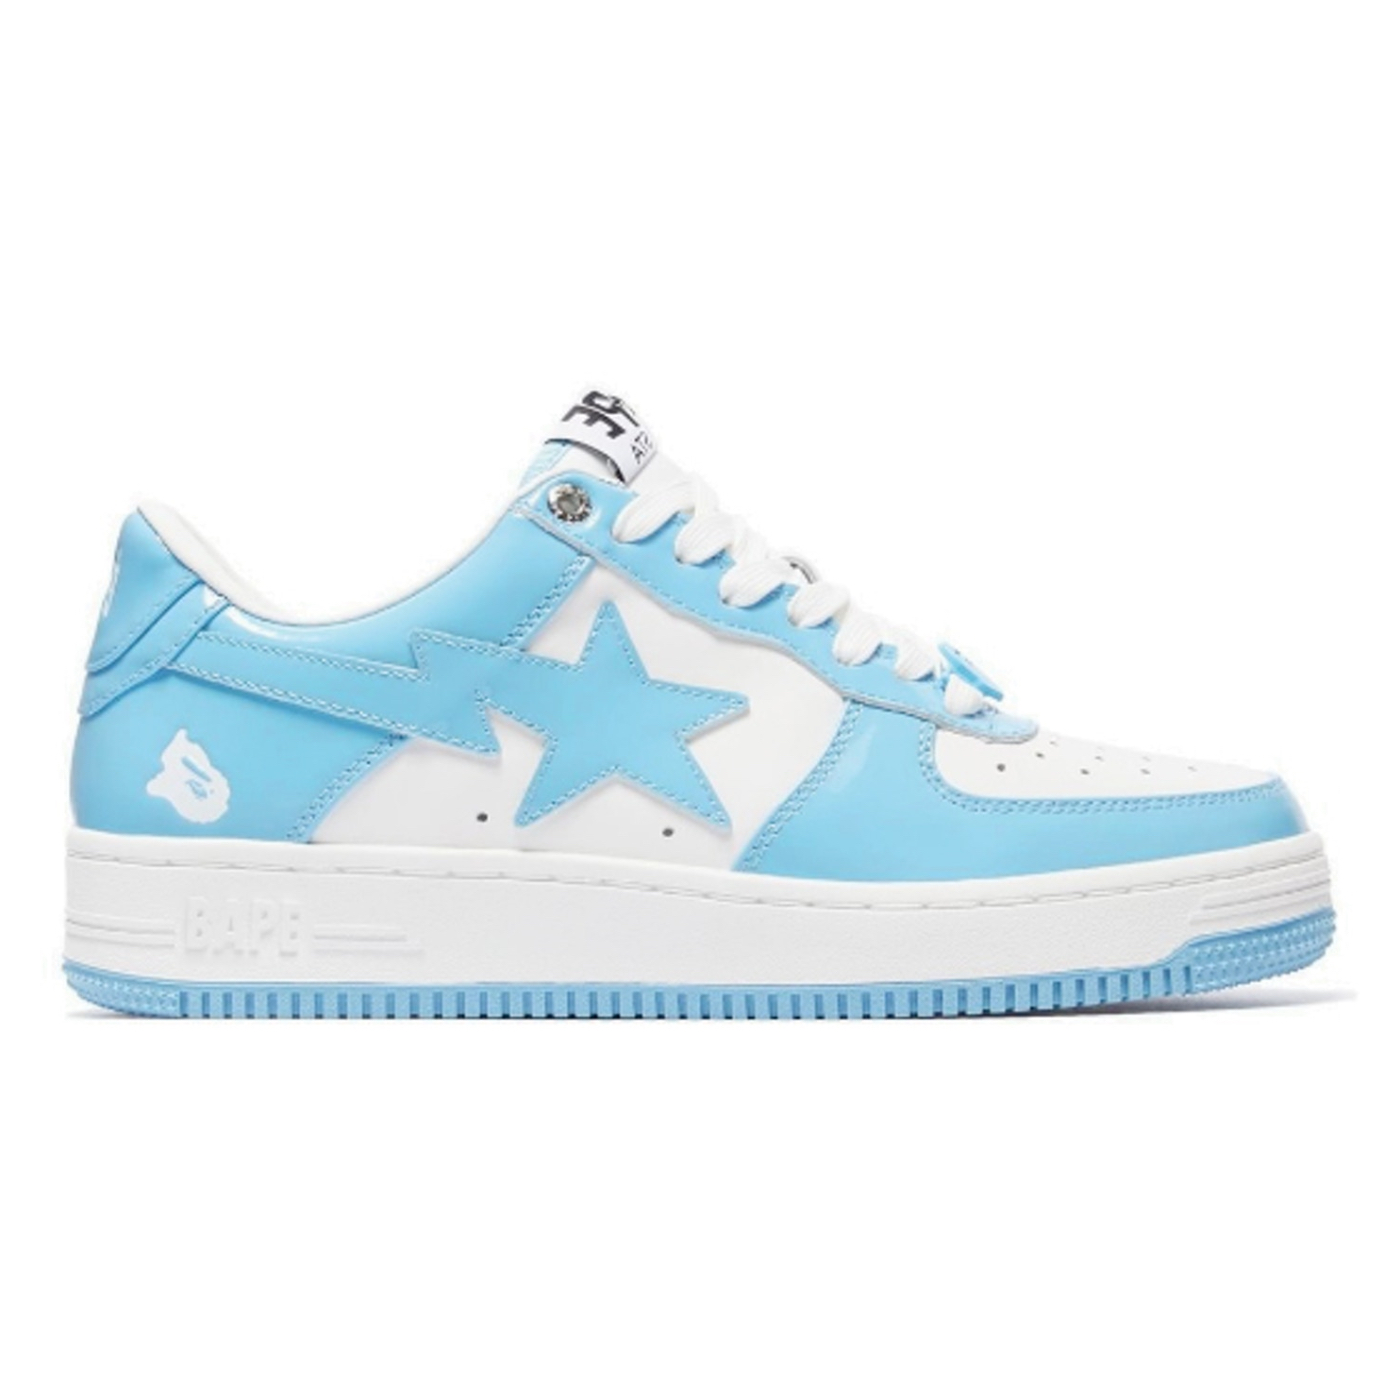 Lingakick Official Online Store » A Bathing Ape Bape Sta Patent Leather ...